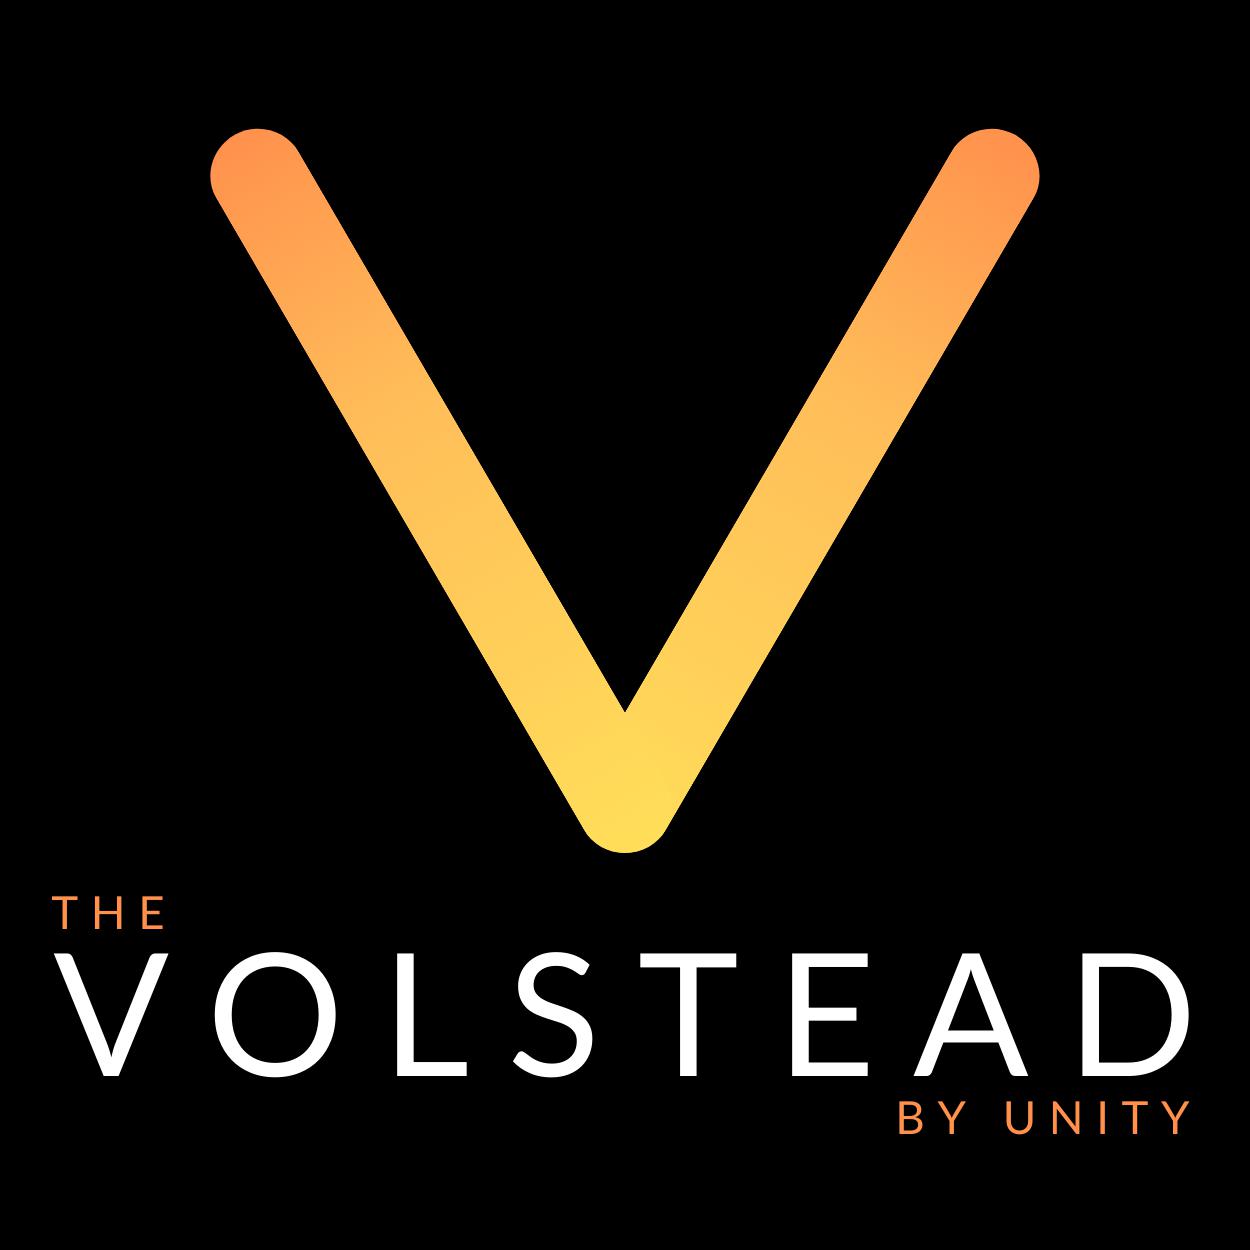 The Volstead by Unity